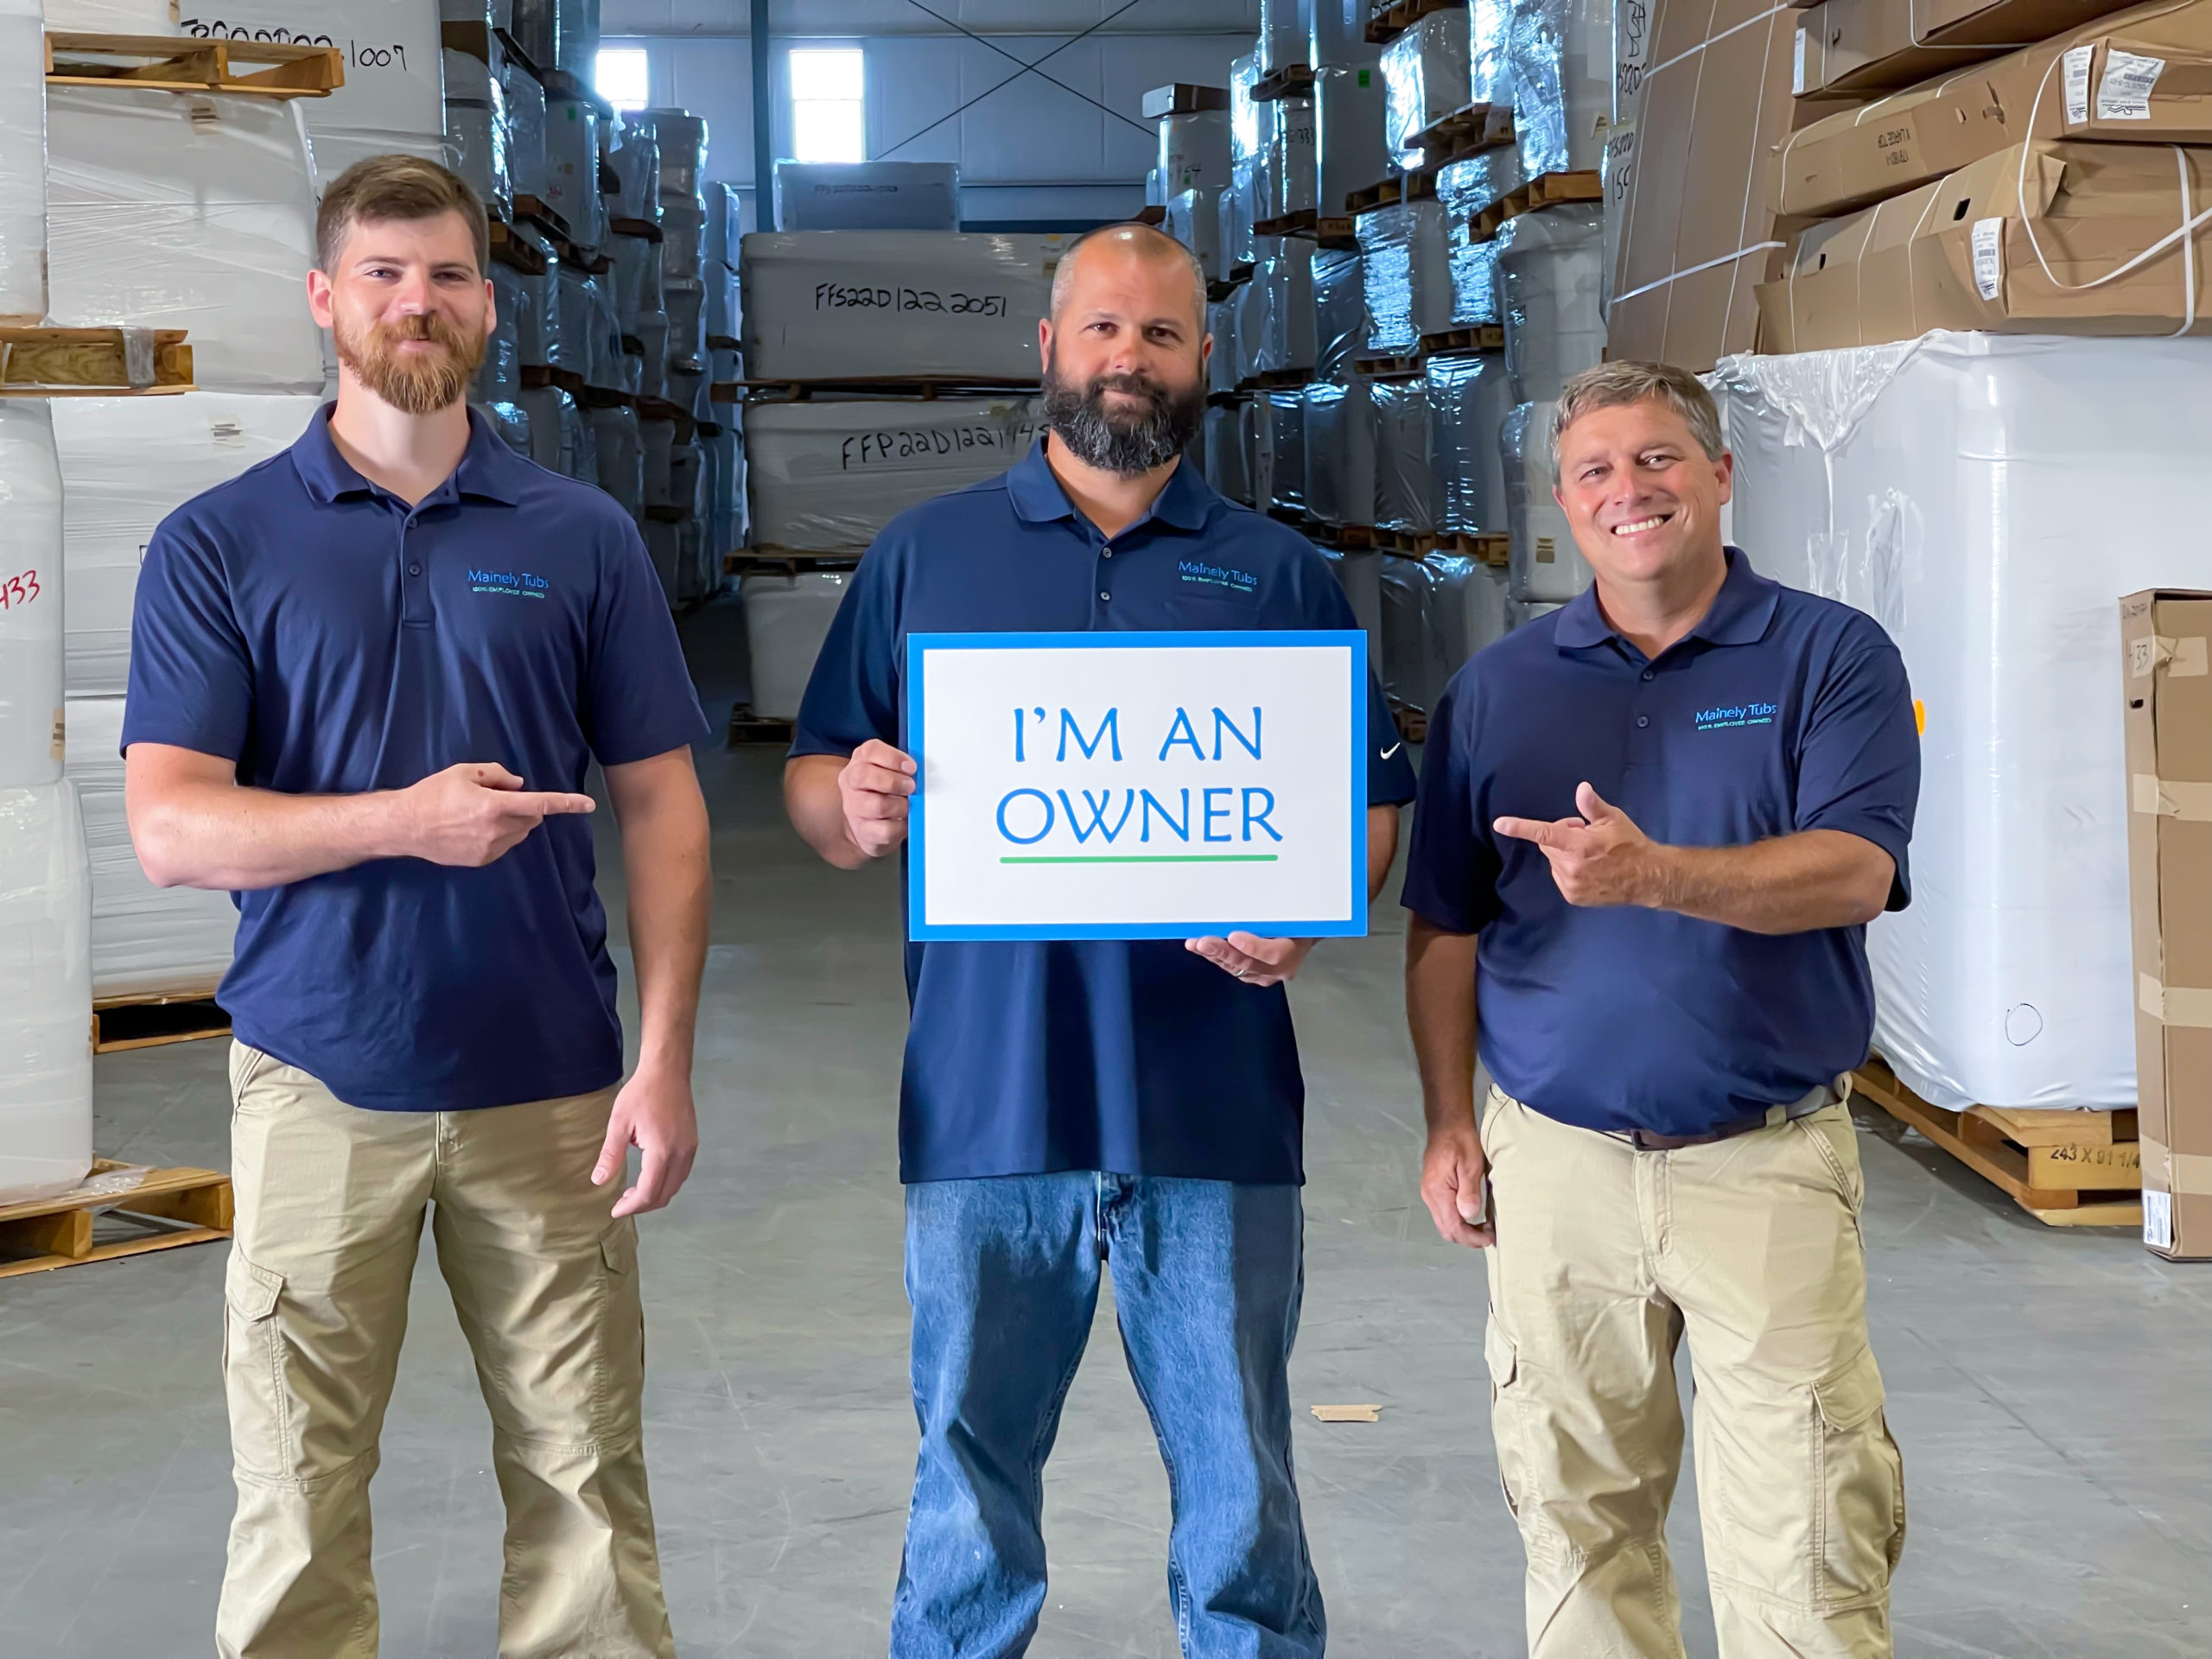 Three service technicians, one on the middle holding 'I'm an owner sign.'